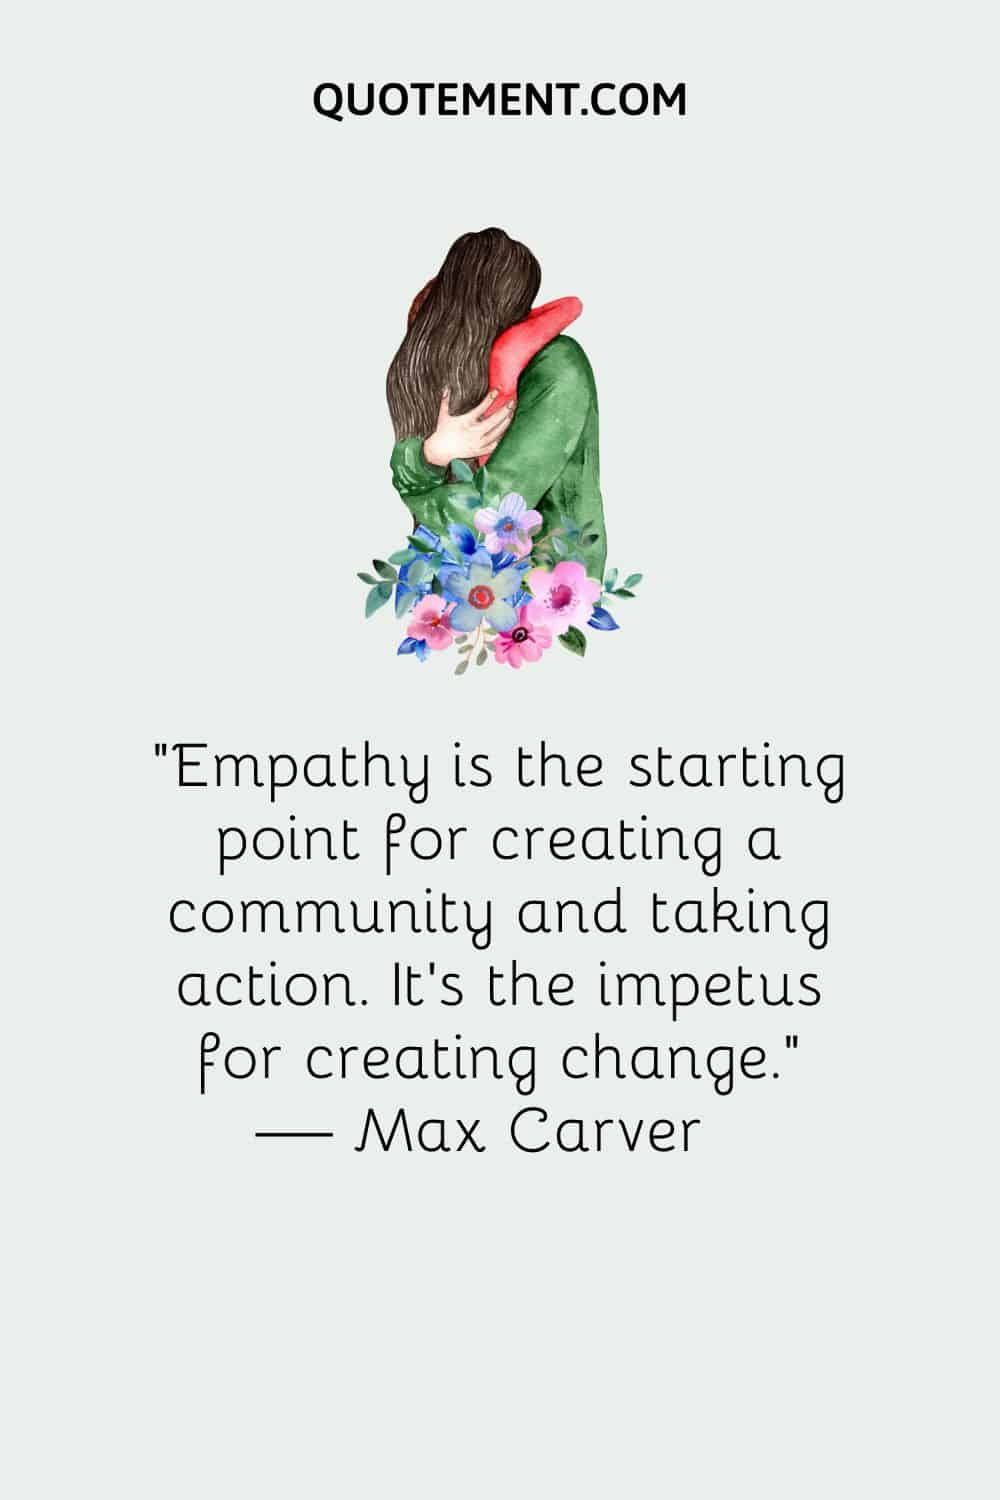 Empathy is the starting point for creating a community and taking action. It’s the impetus for creating change